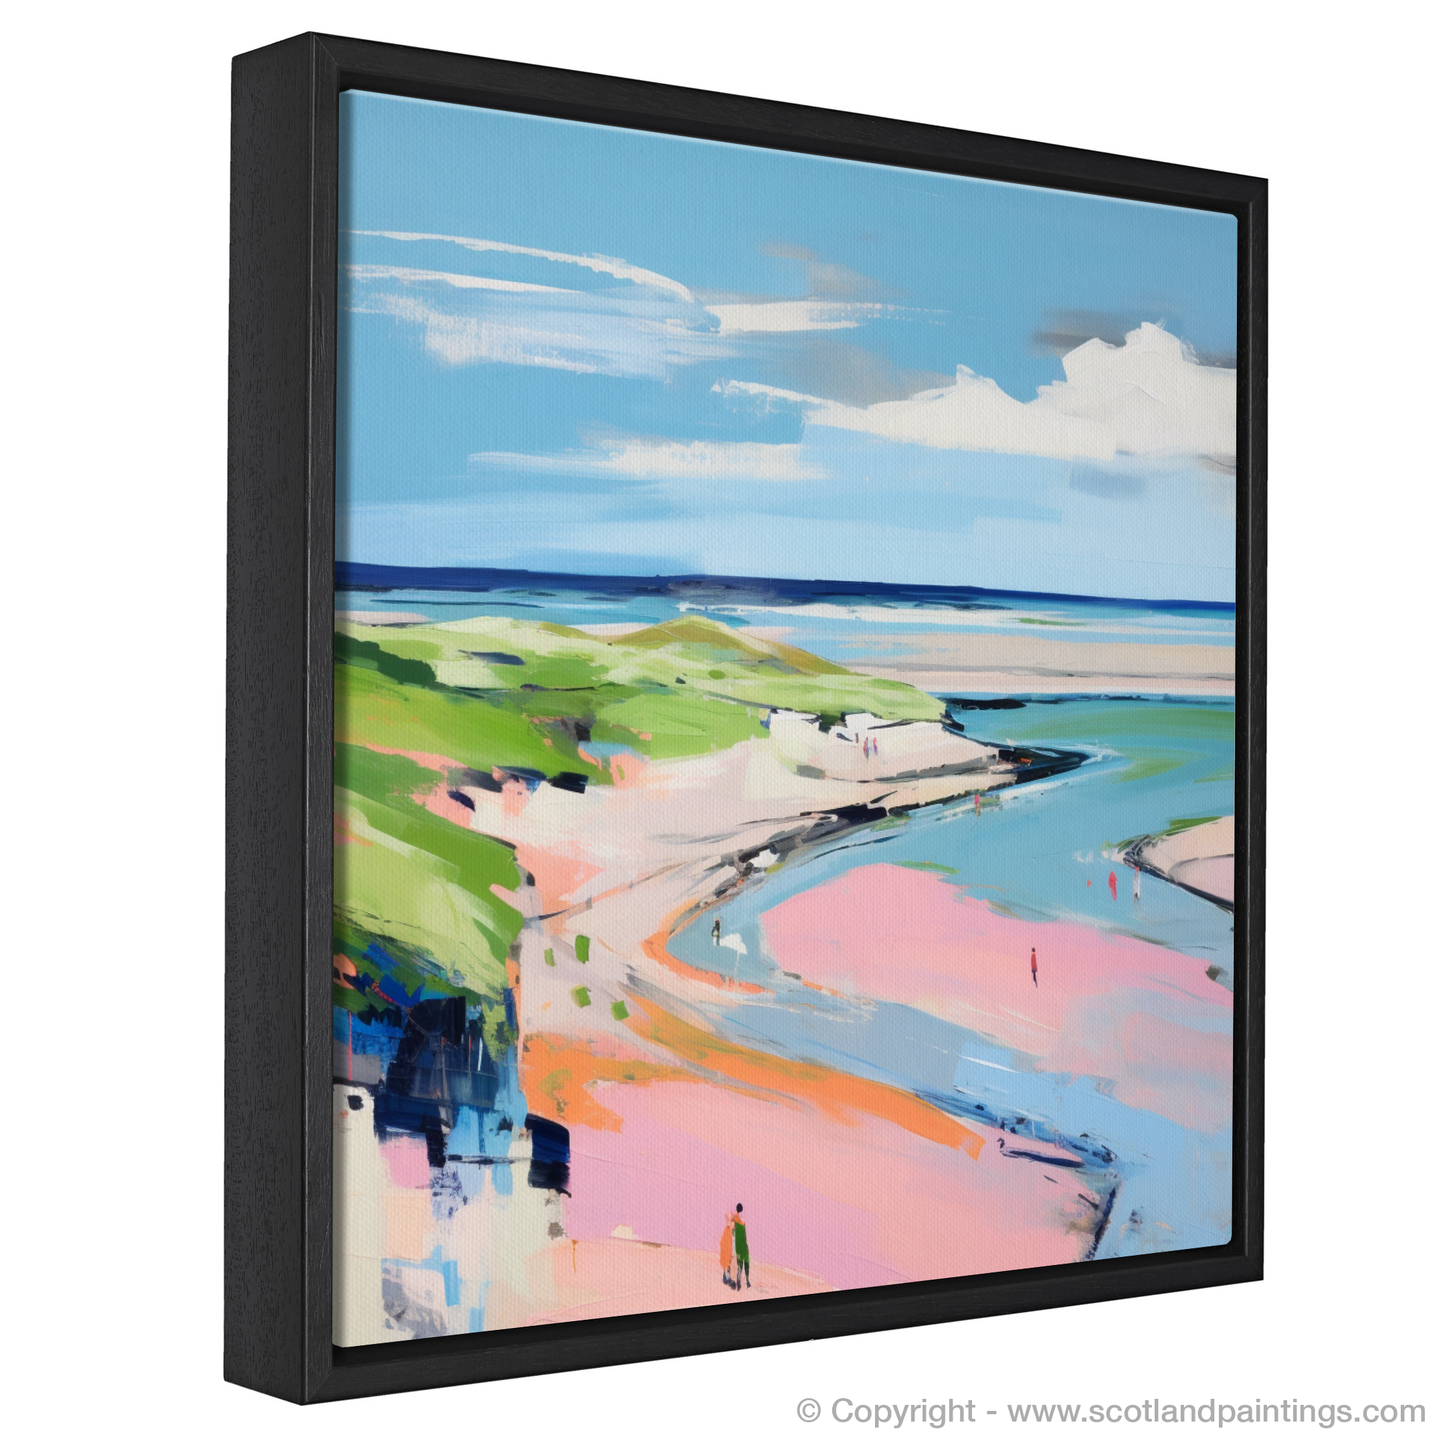 Painting and Art Print of St Cyrus Beach, Aberdeenshire in summer entitled "Aberdeenshire Summer Serenity: A Modern Ode to St Cyrus Beach".